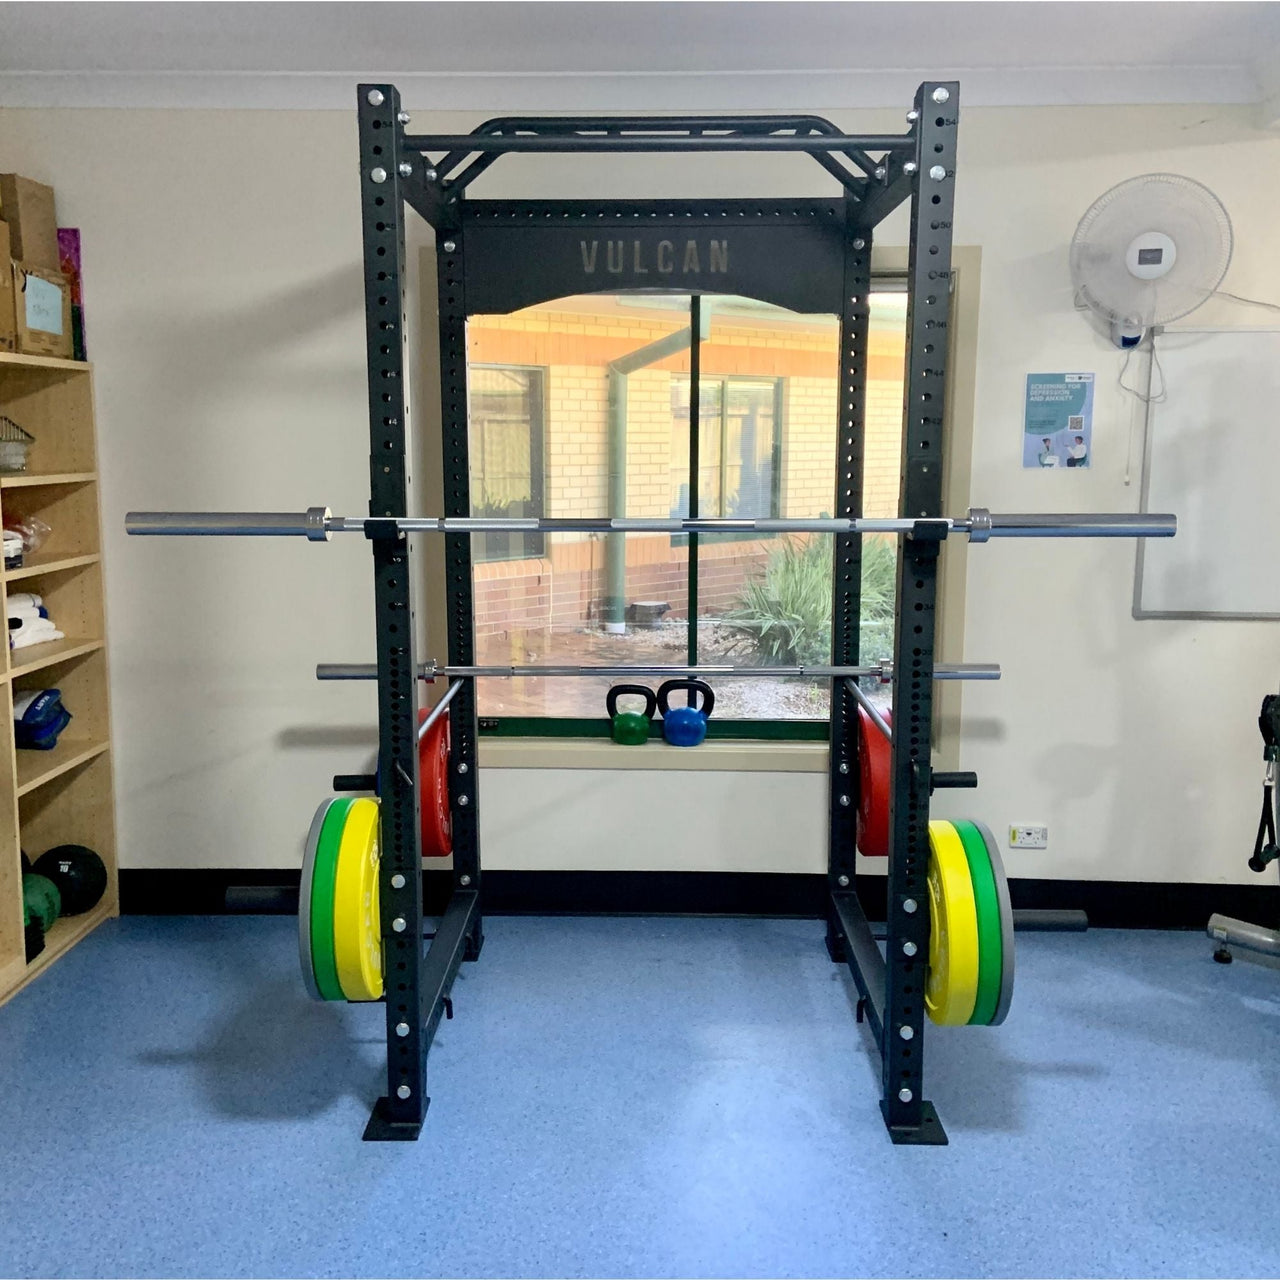 VULCAN Atlas Power Rack, Olympic Barbell, 100kg Black Bumper Weight Plates & Pro Adjustable Bench | IN STOCK